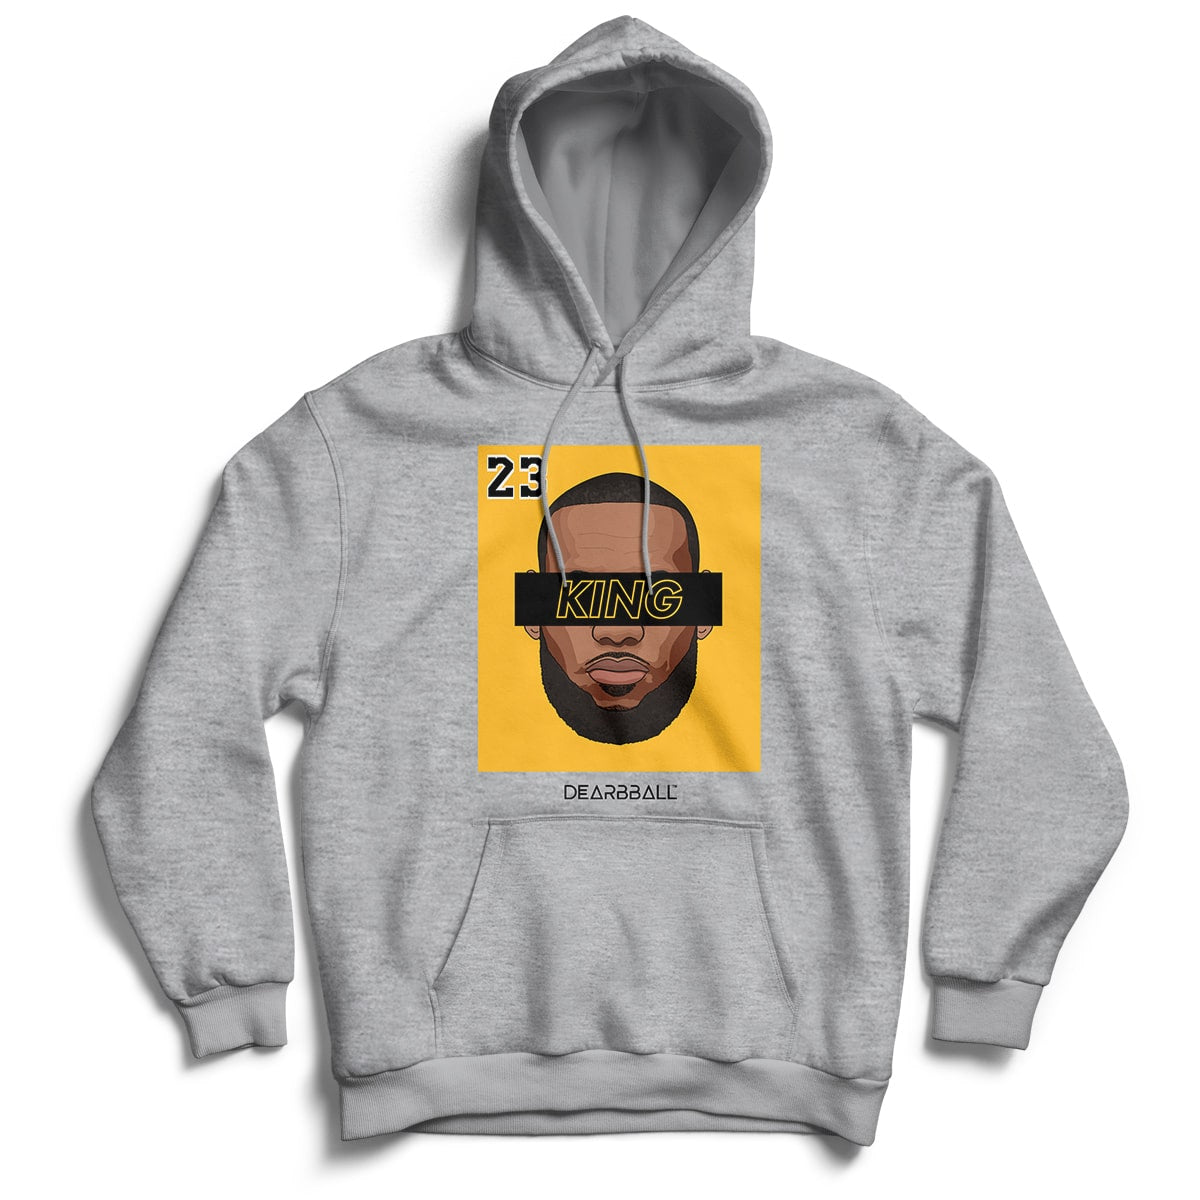 Hoodie-Lebron-James-Los-Angeles-Lakers-Dearbball-clothes-brand-france